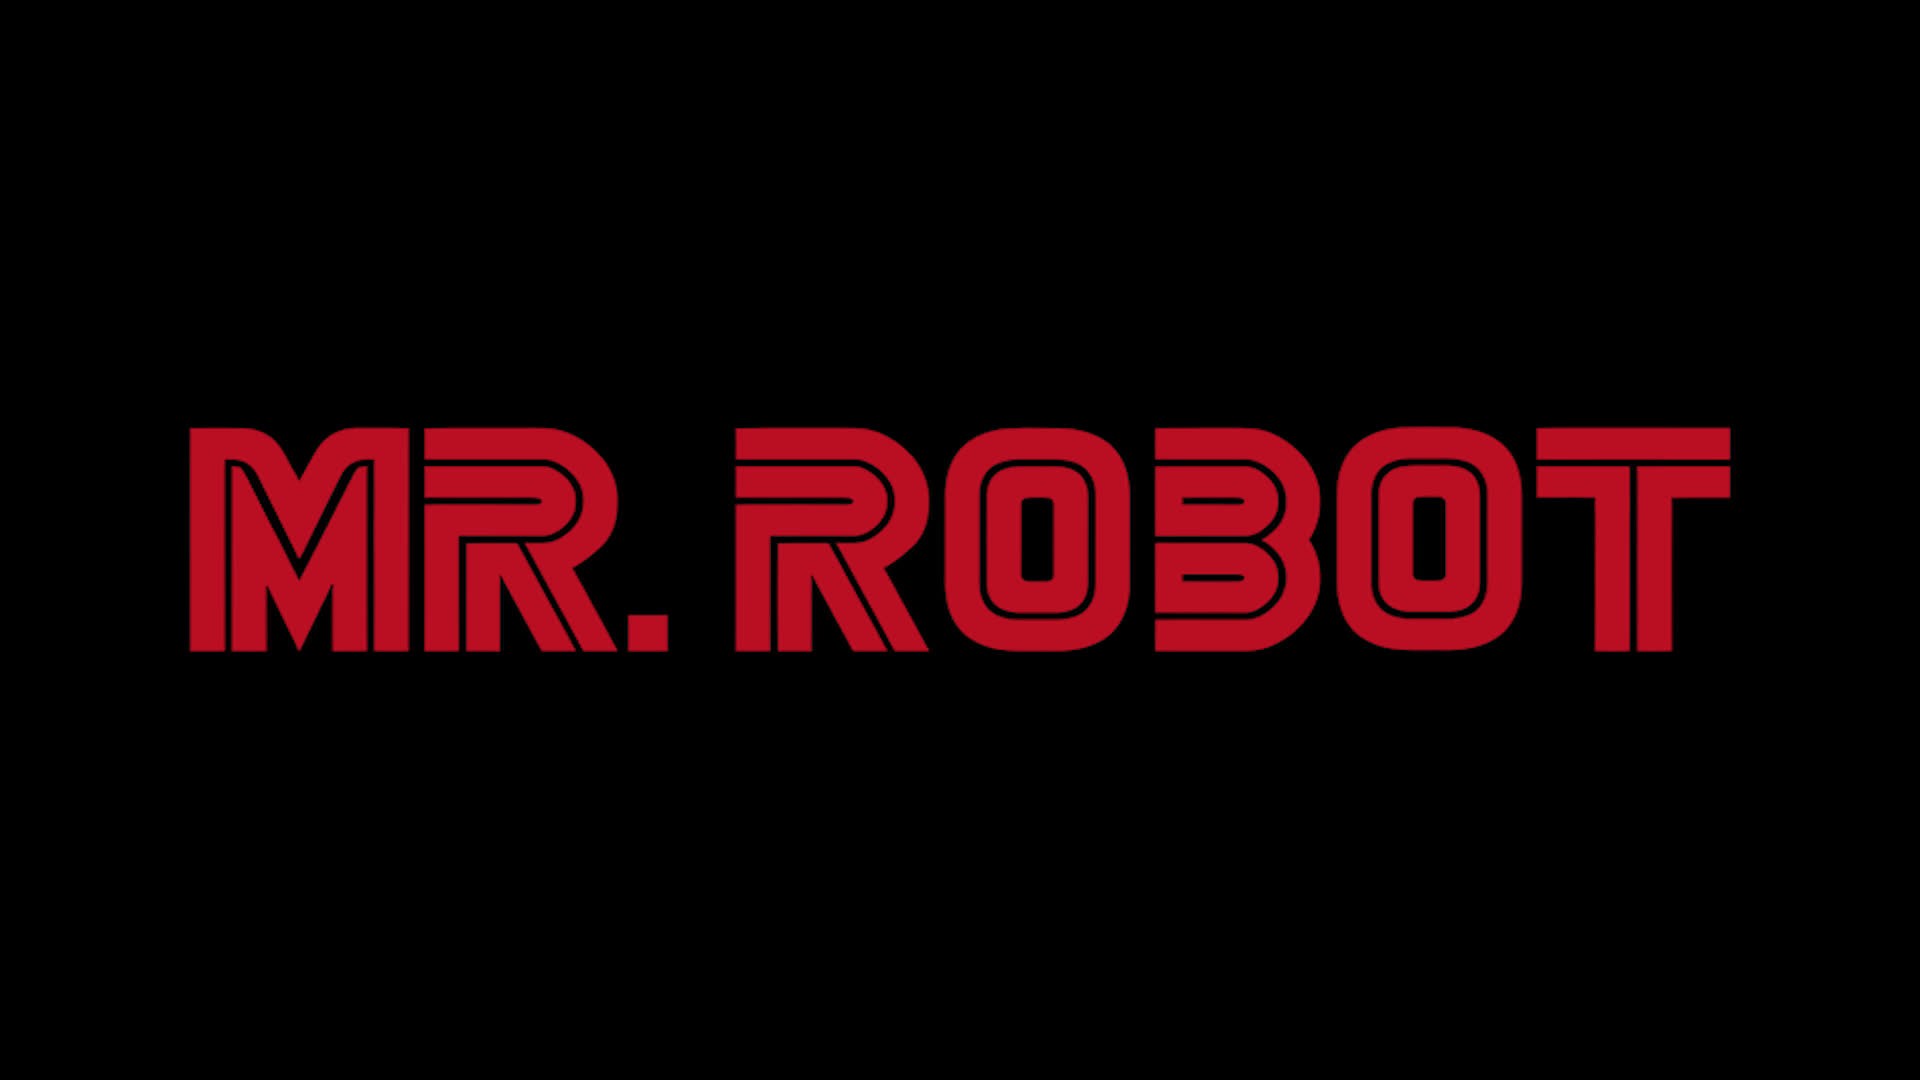 MR. ROBOT VIRTUAL REALITY EXPERIENCE